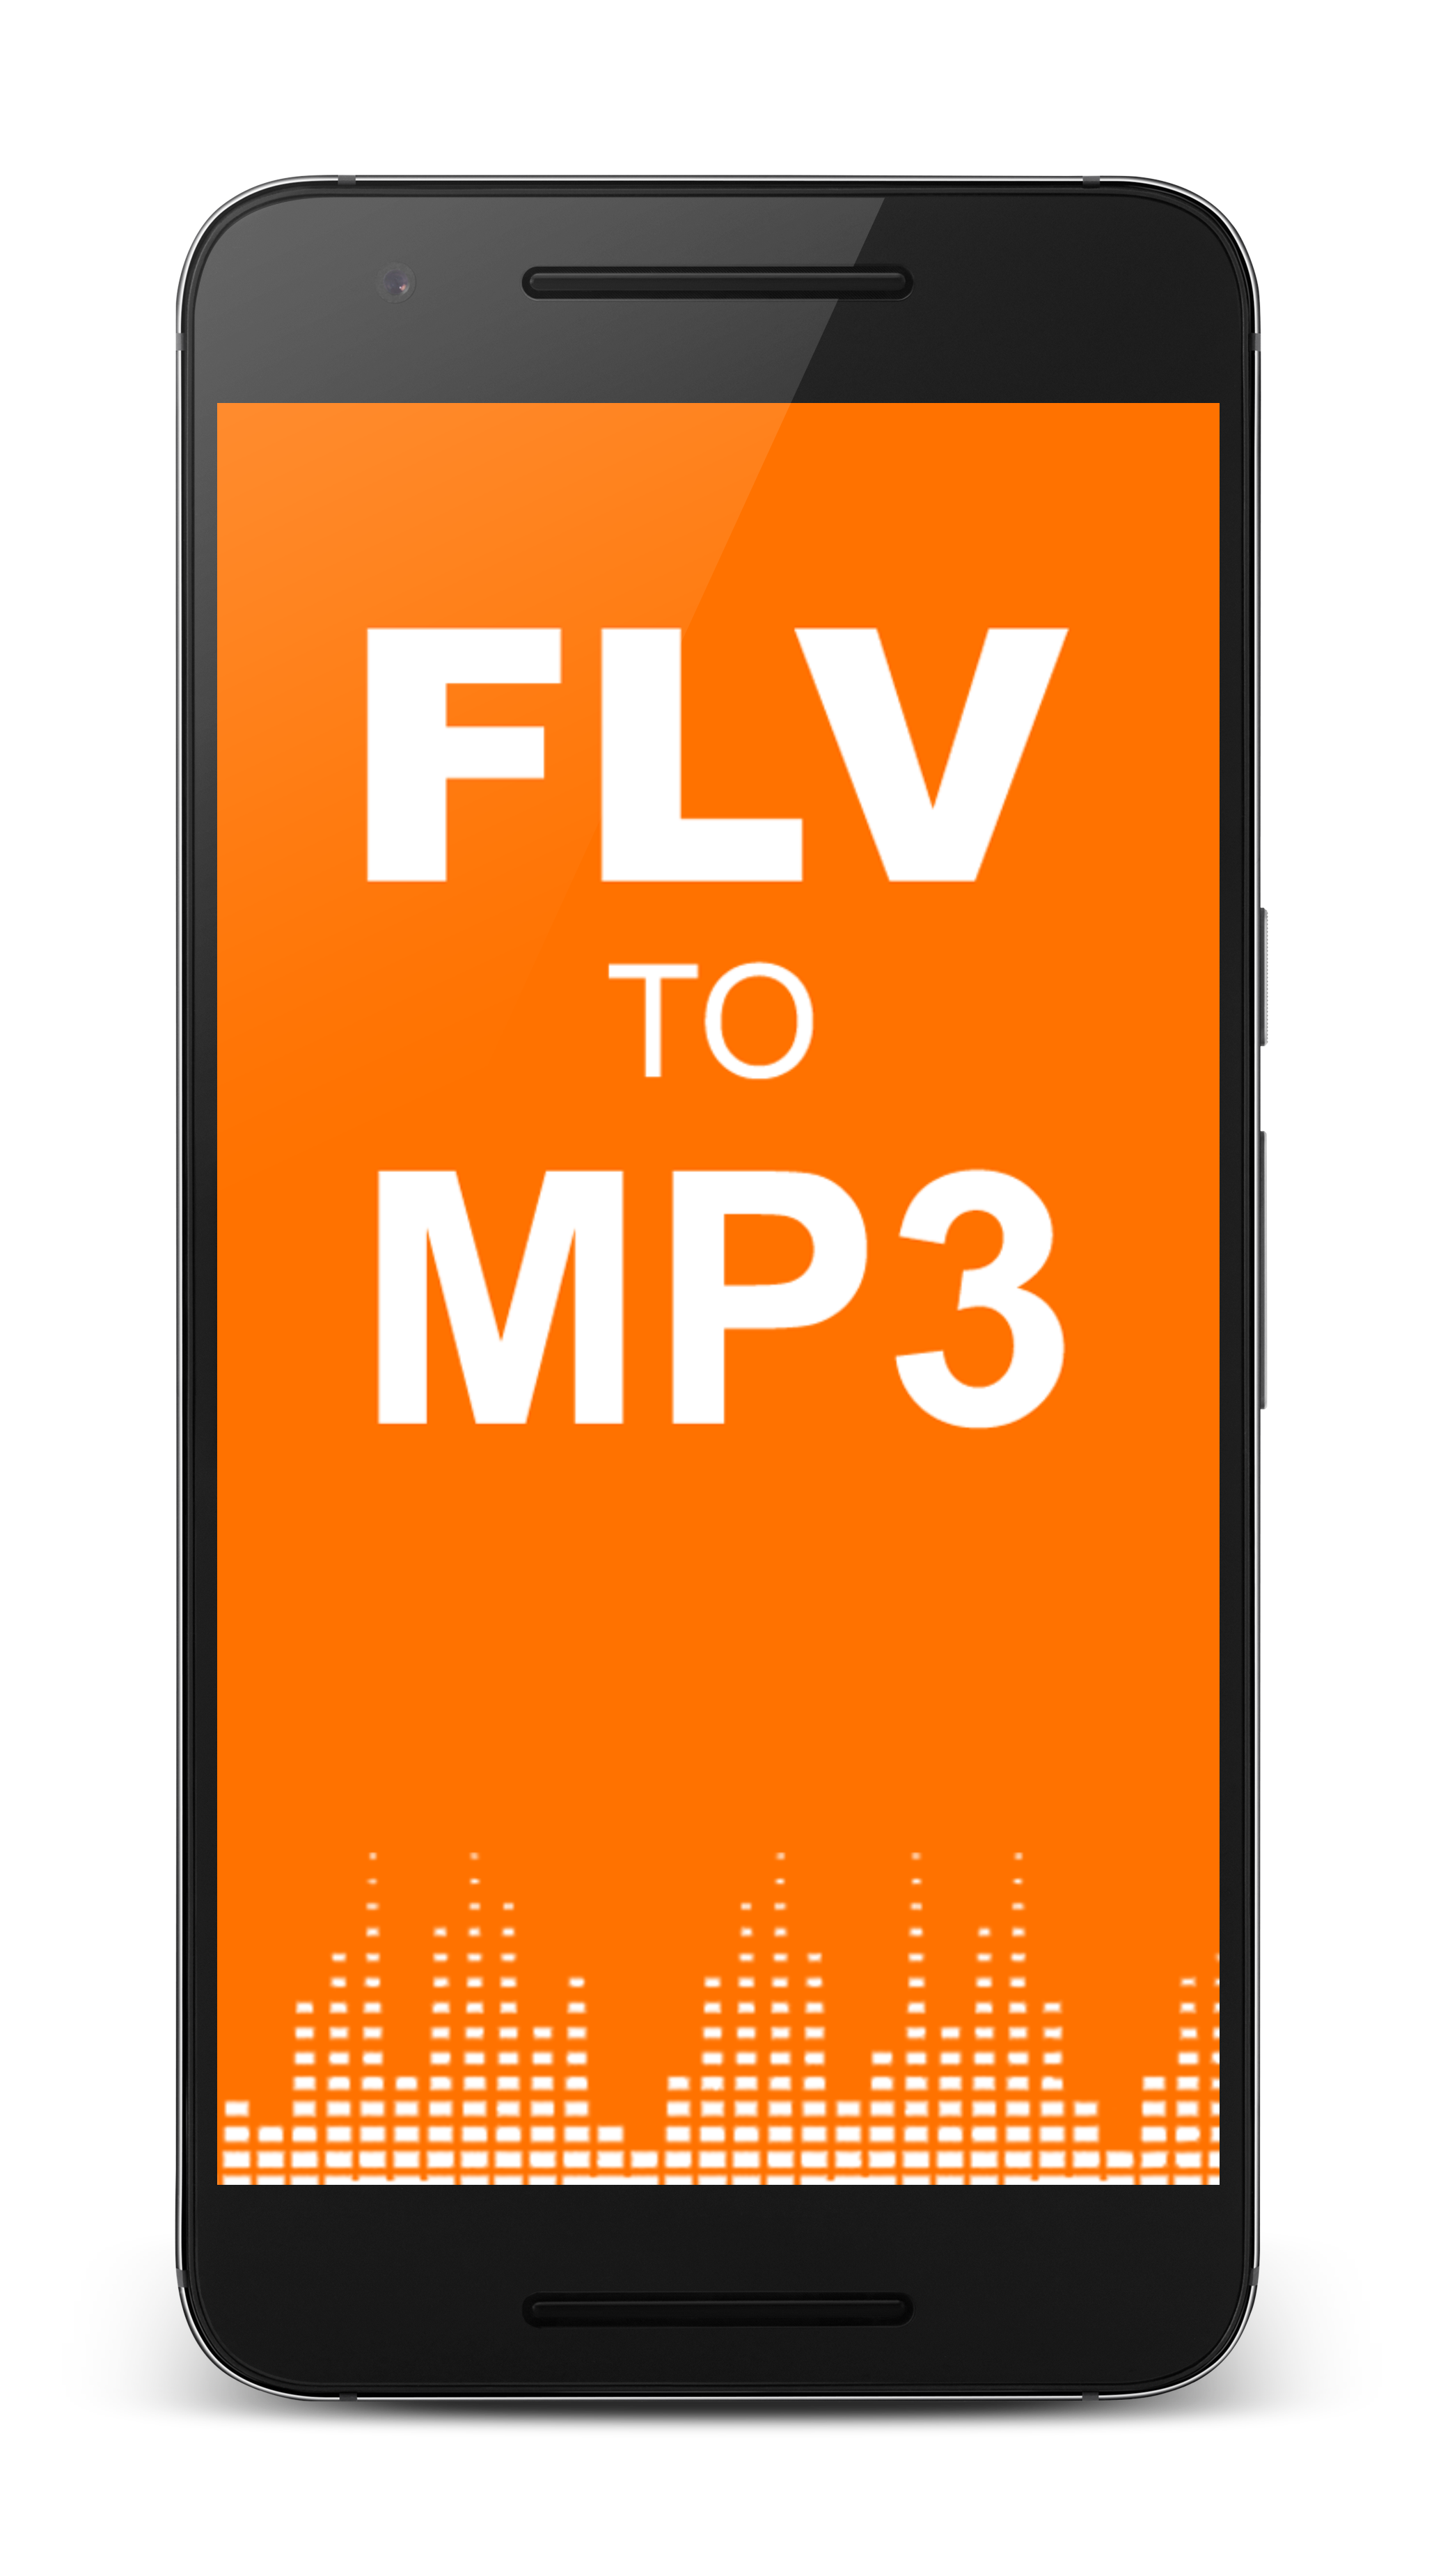 FLV to MP3 Converter APK 1.0.4 for Android – Download FLV to MP3 Converter  APK Latest Version from APKFab.com